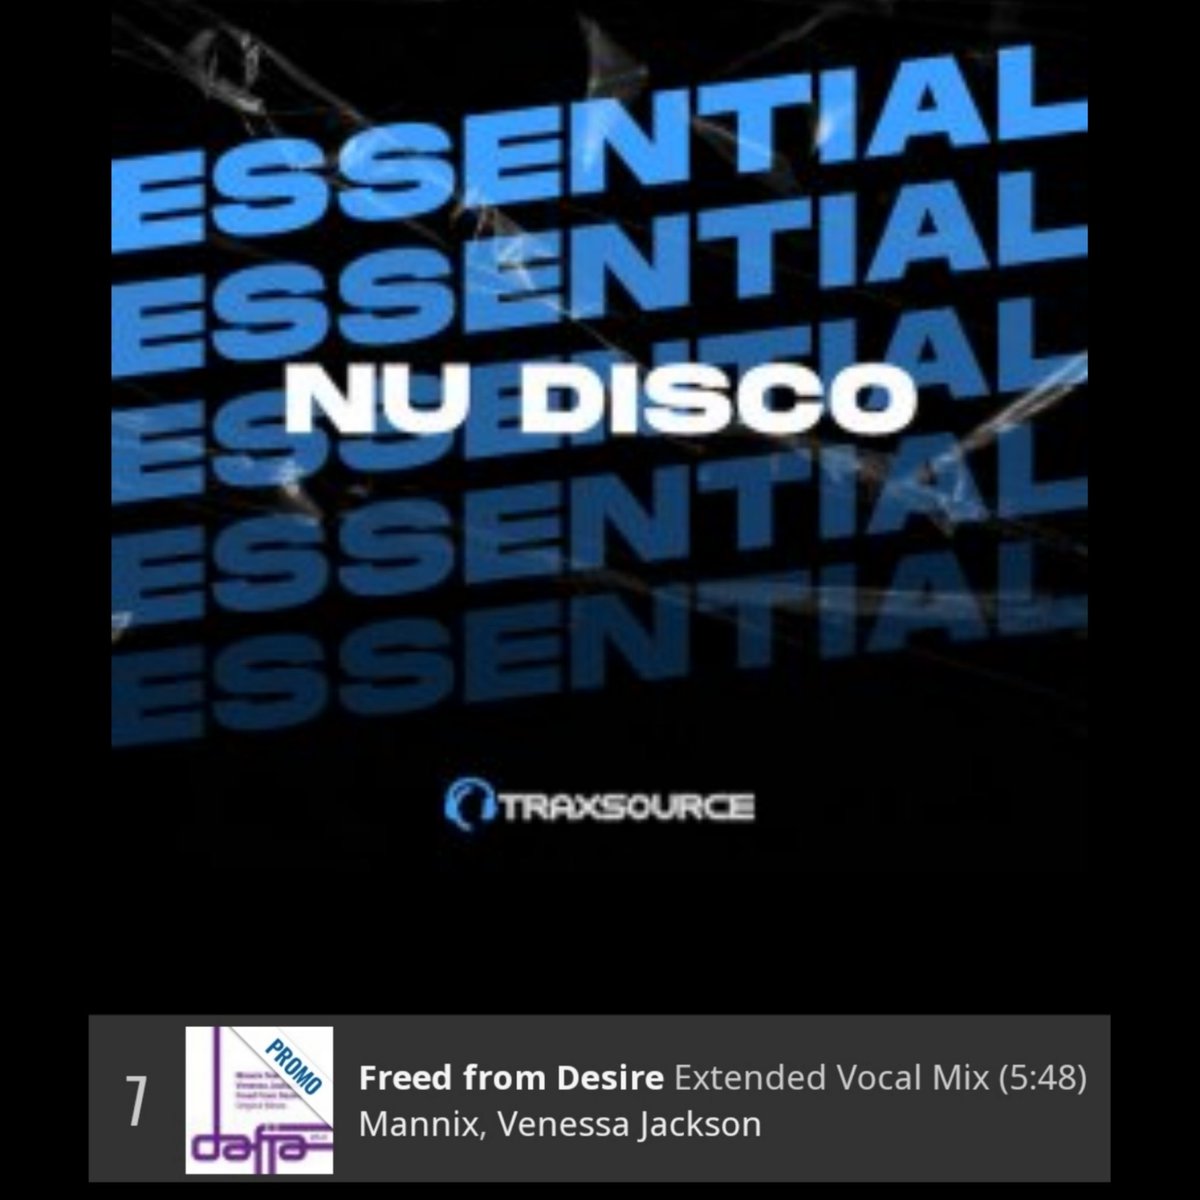 Thank you @traxsource  for the spotlight and ft our track on the #weekendweapons #nudisco Essentials & #HYPECharts 
@MannixKling  @VenessaJackson7 
'Freed From Desire' 

traxsource.com/title/2236091/…

Head on over to Traxsource and Purchase/Chart,/ Share & Enjoy❤️